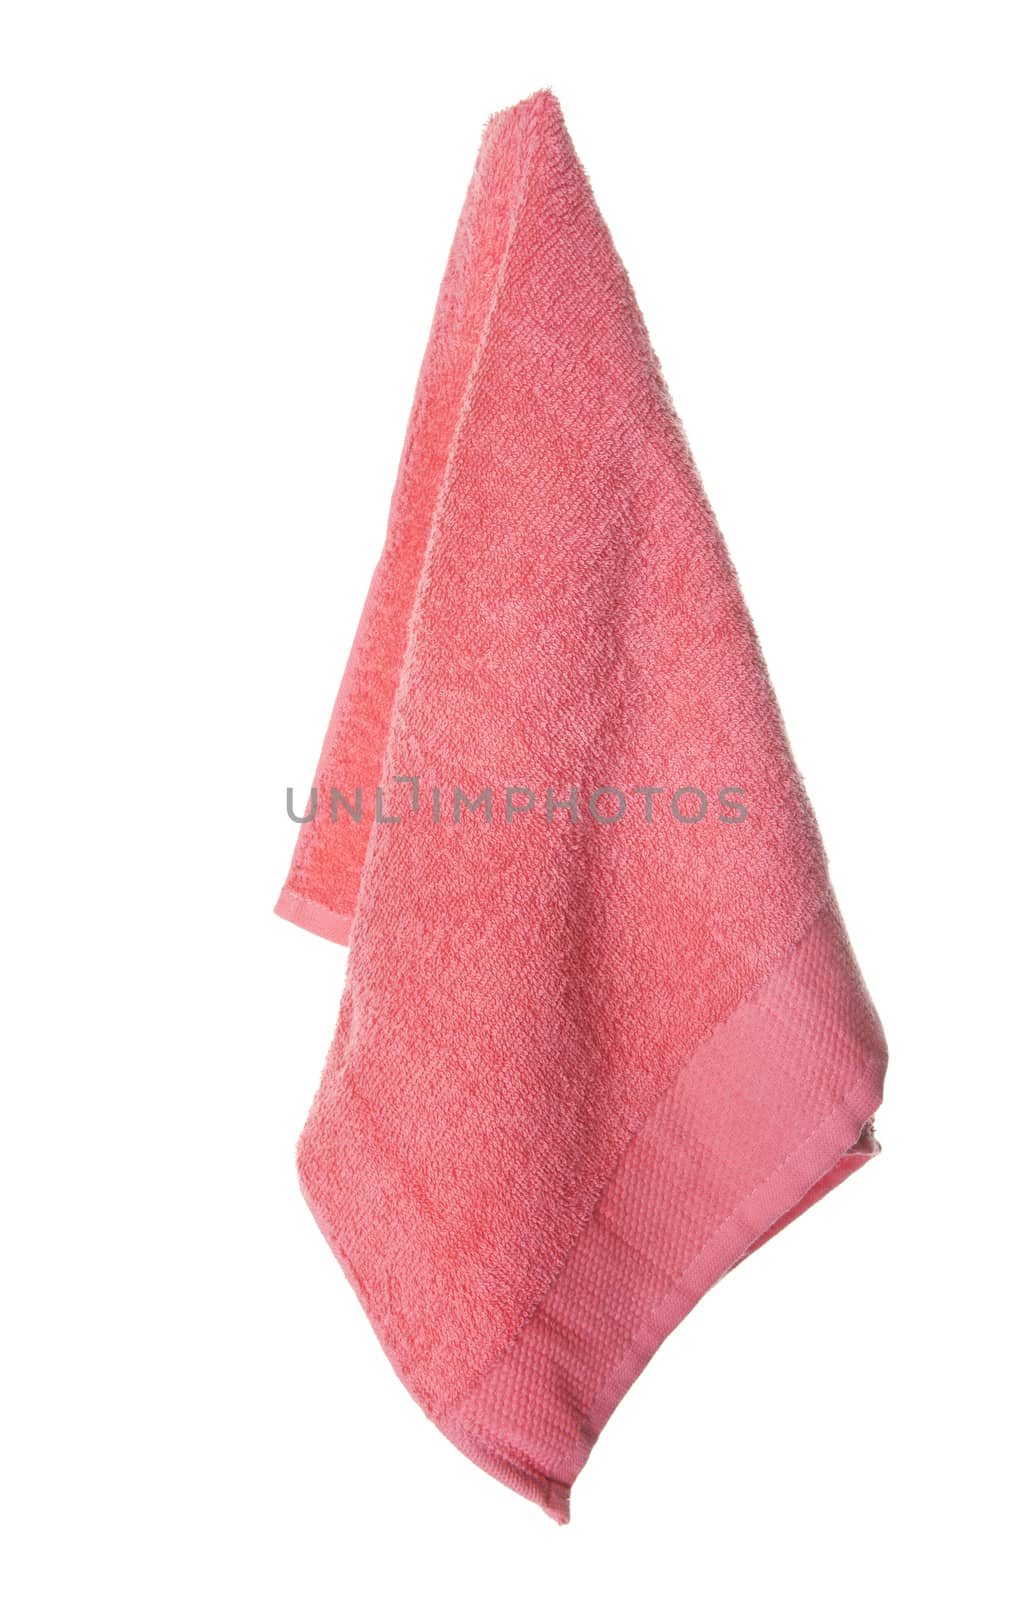 Hot Coral Towel Hanging by songbird839